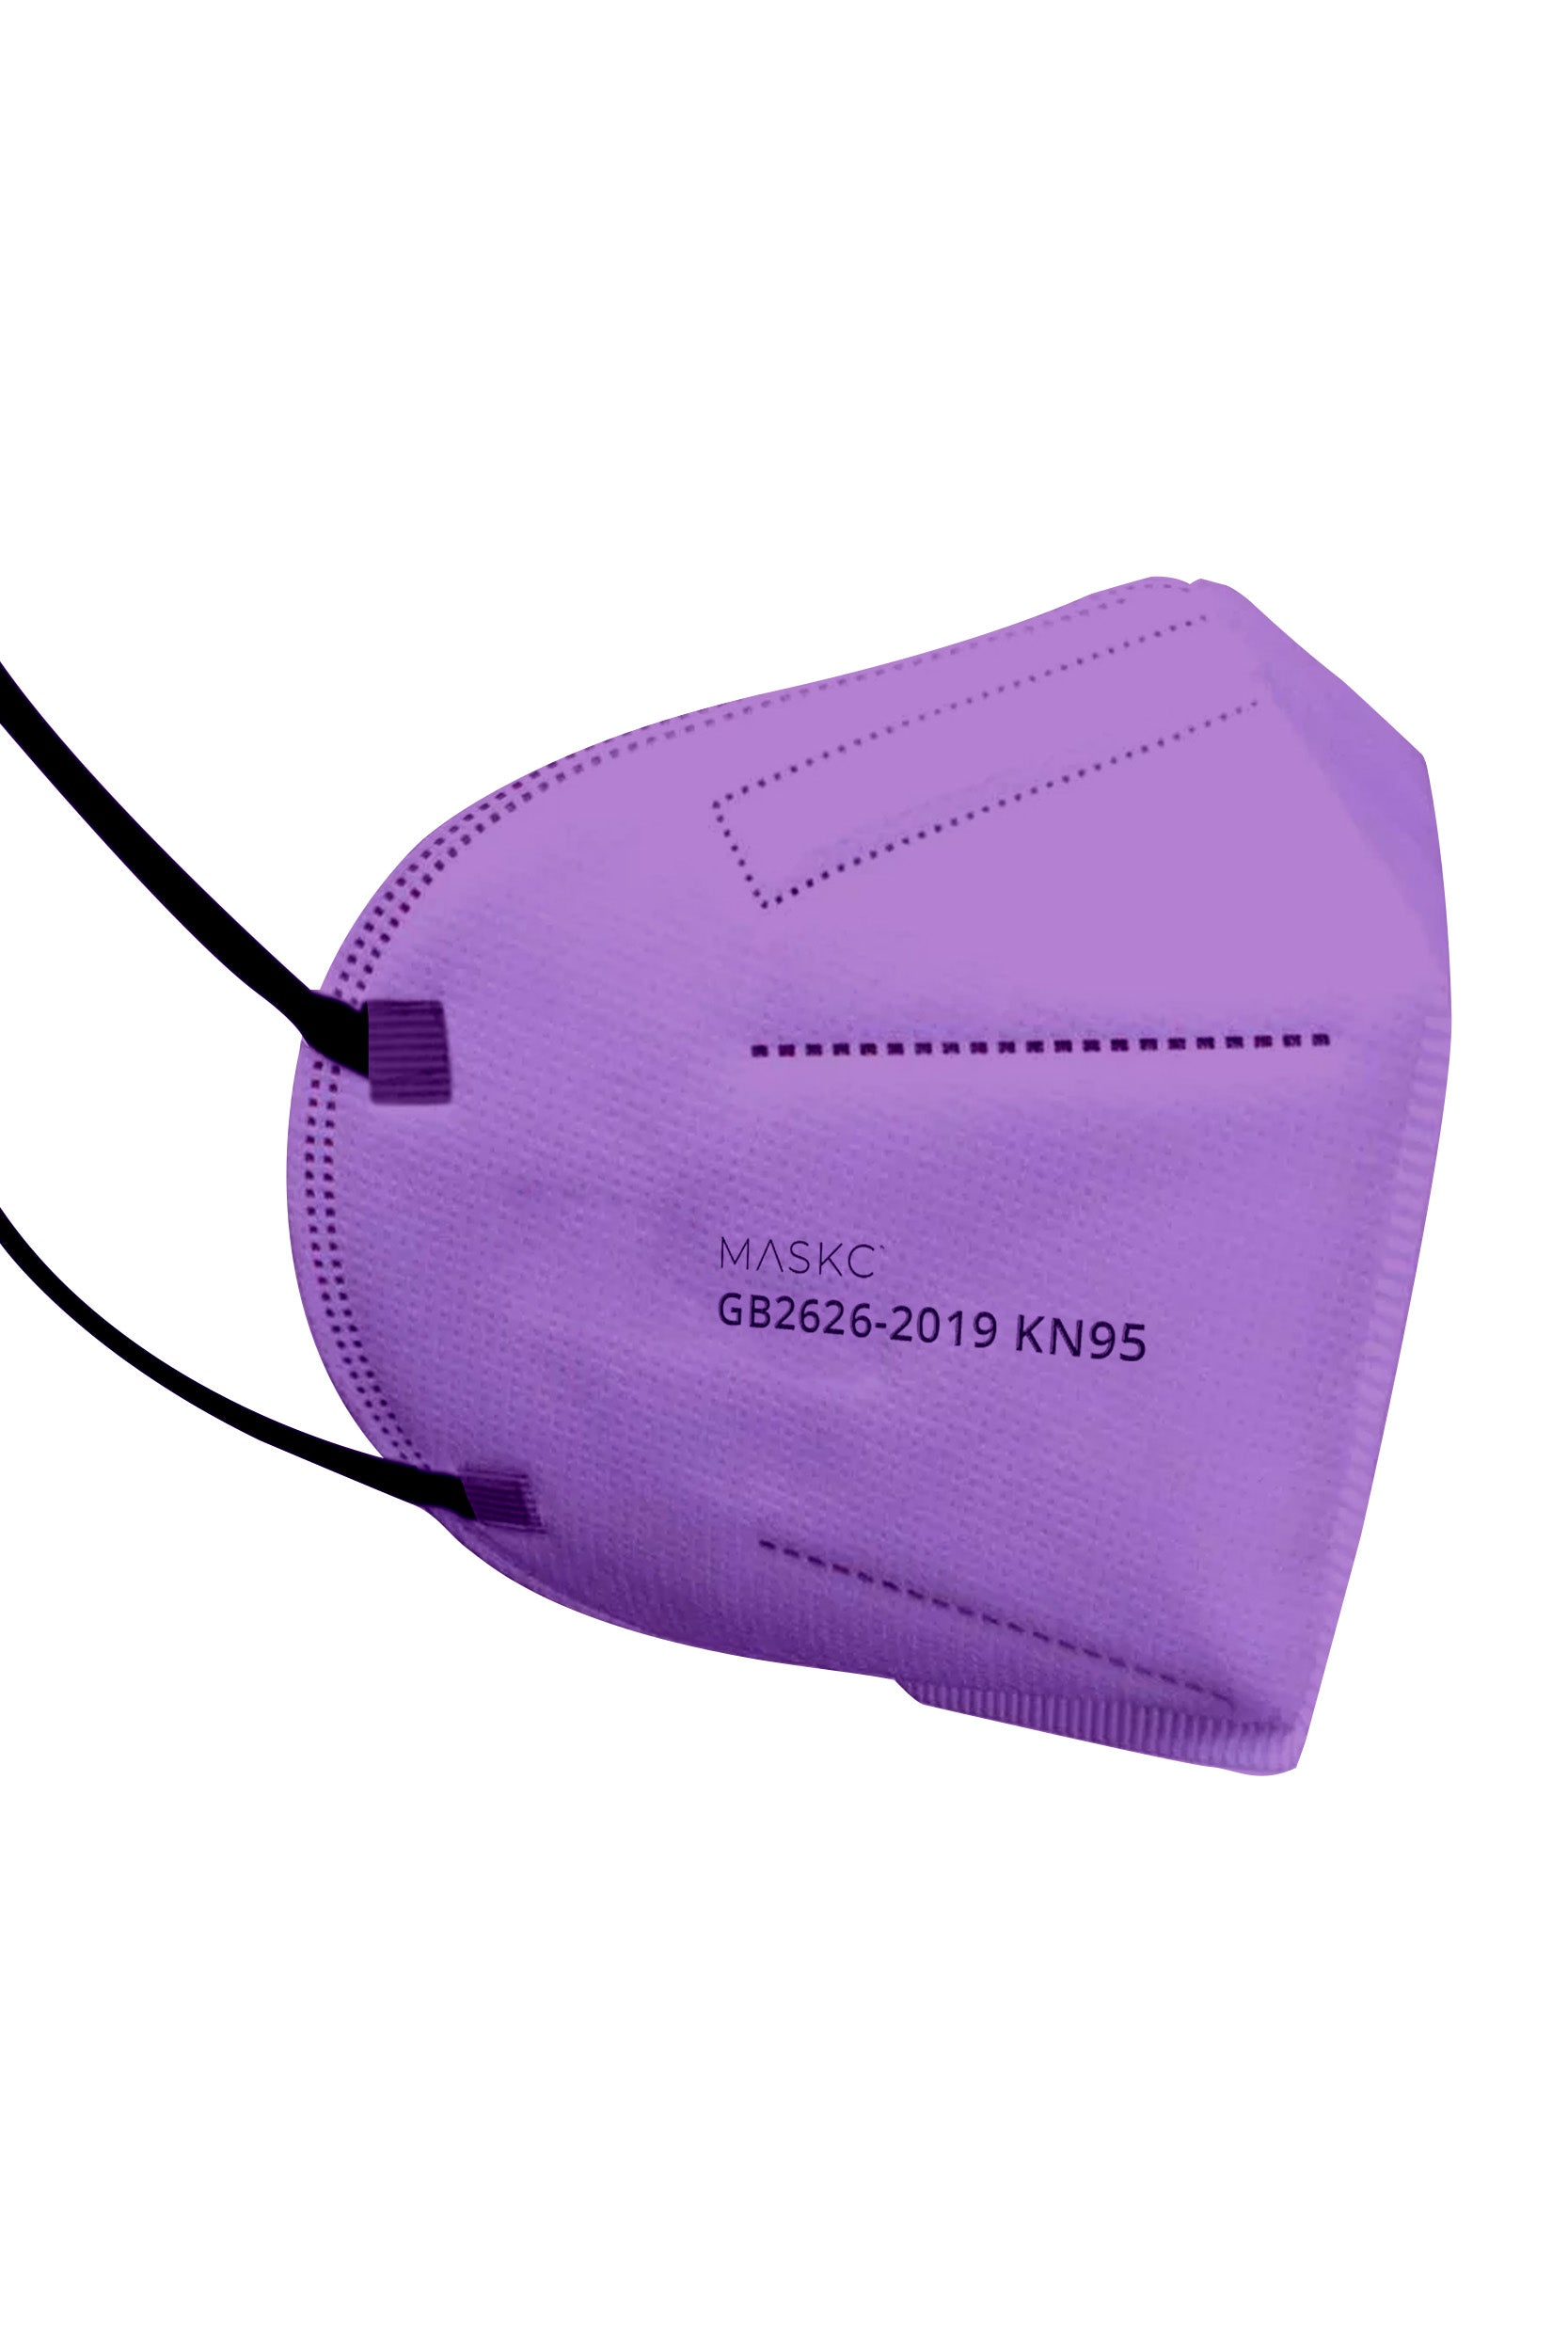 Stylish dark purple KN95 face mask, with soft black ear loops and high quality fabric. 